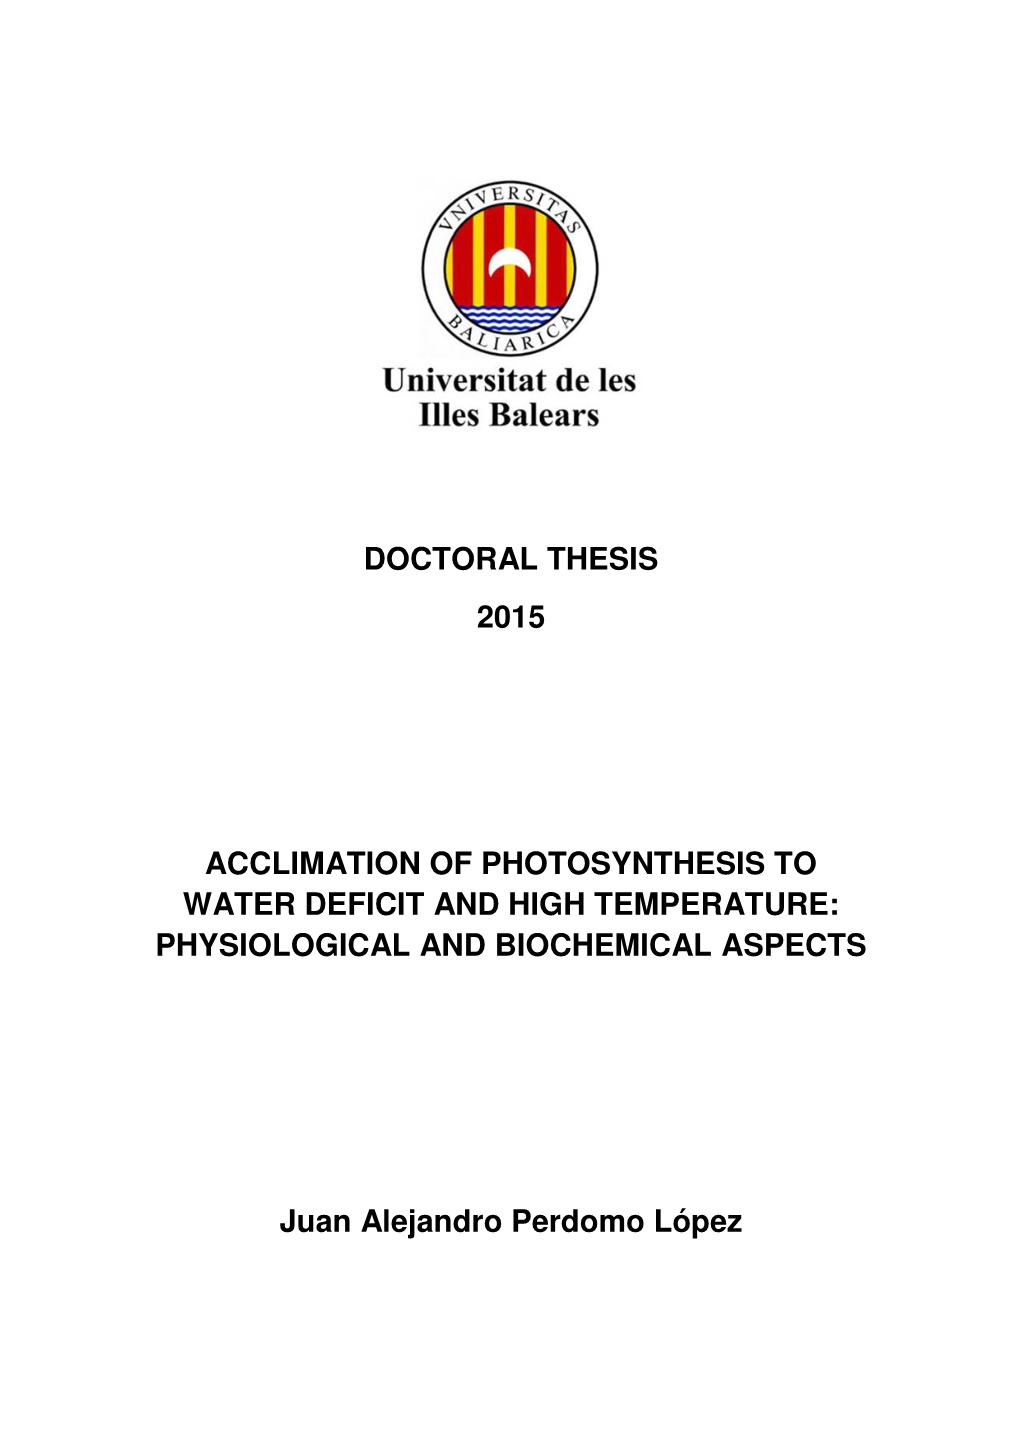 Doctoral Thesis 2015